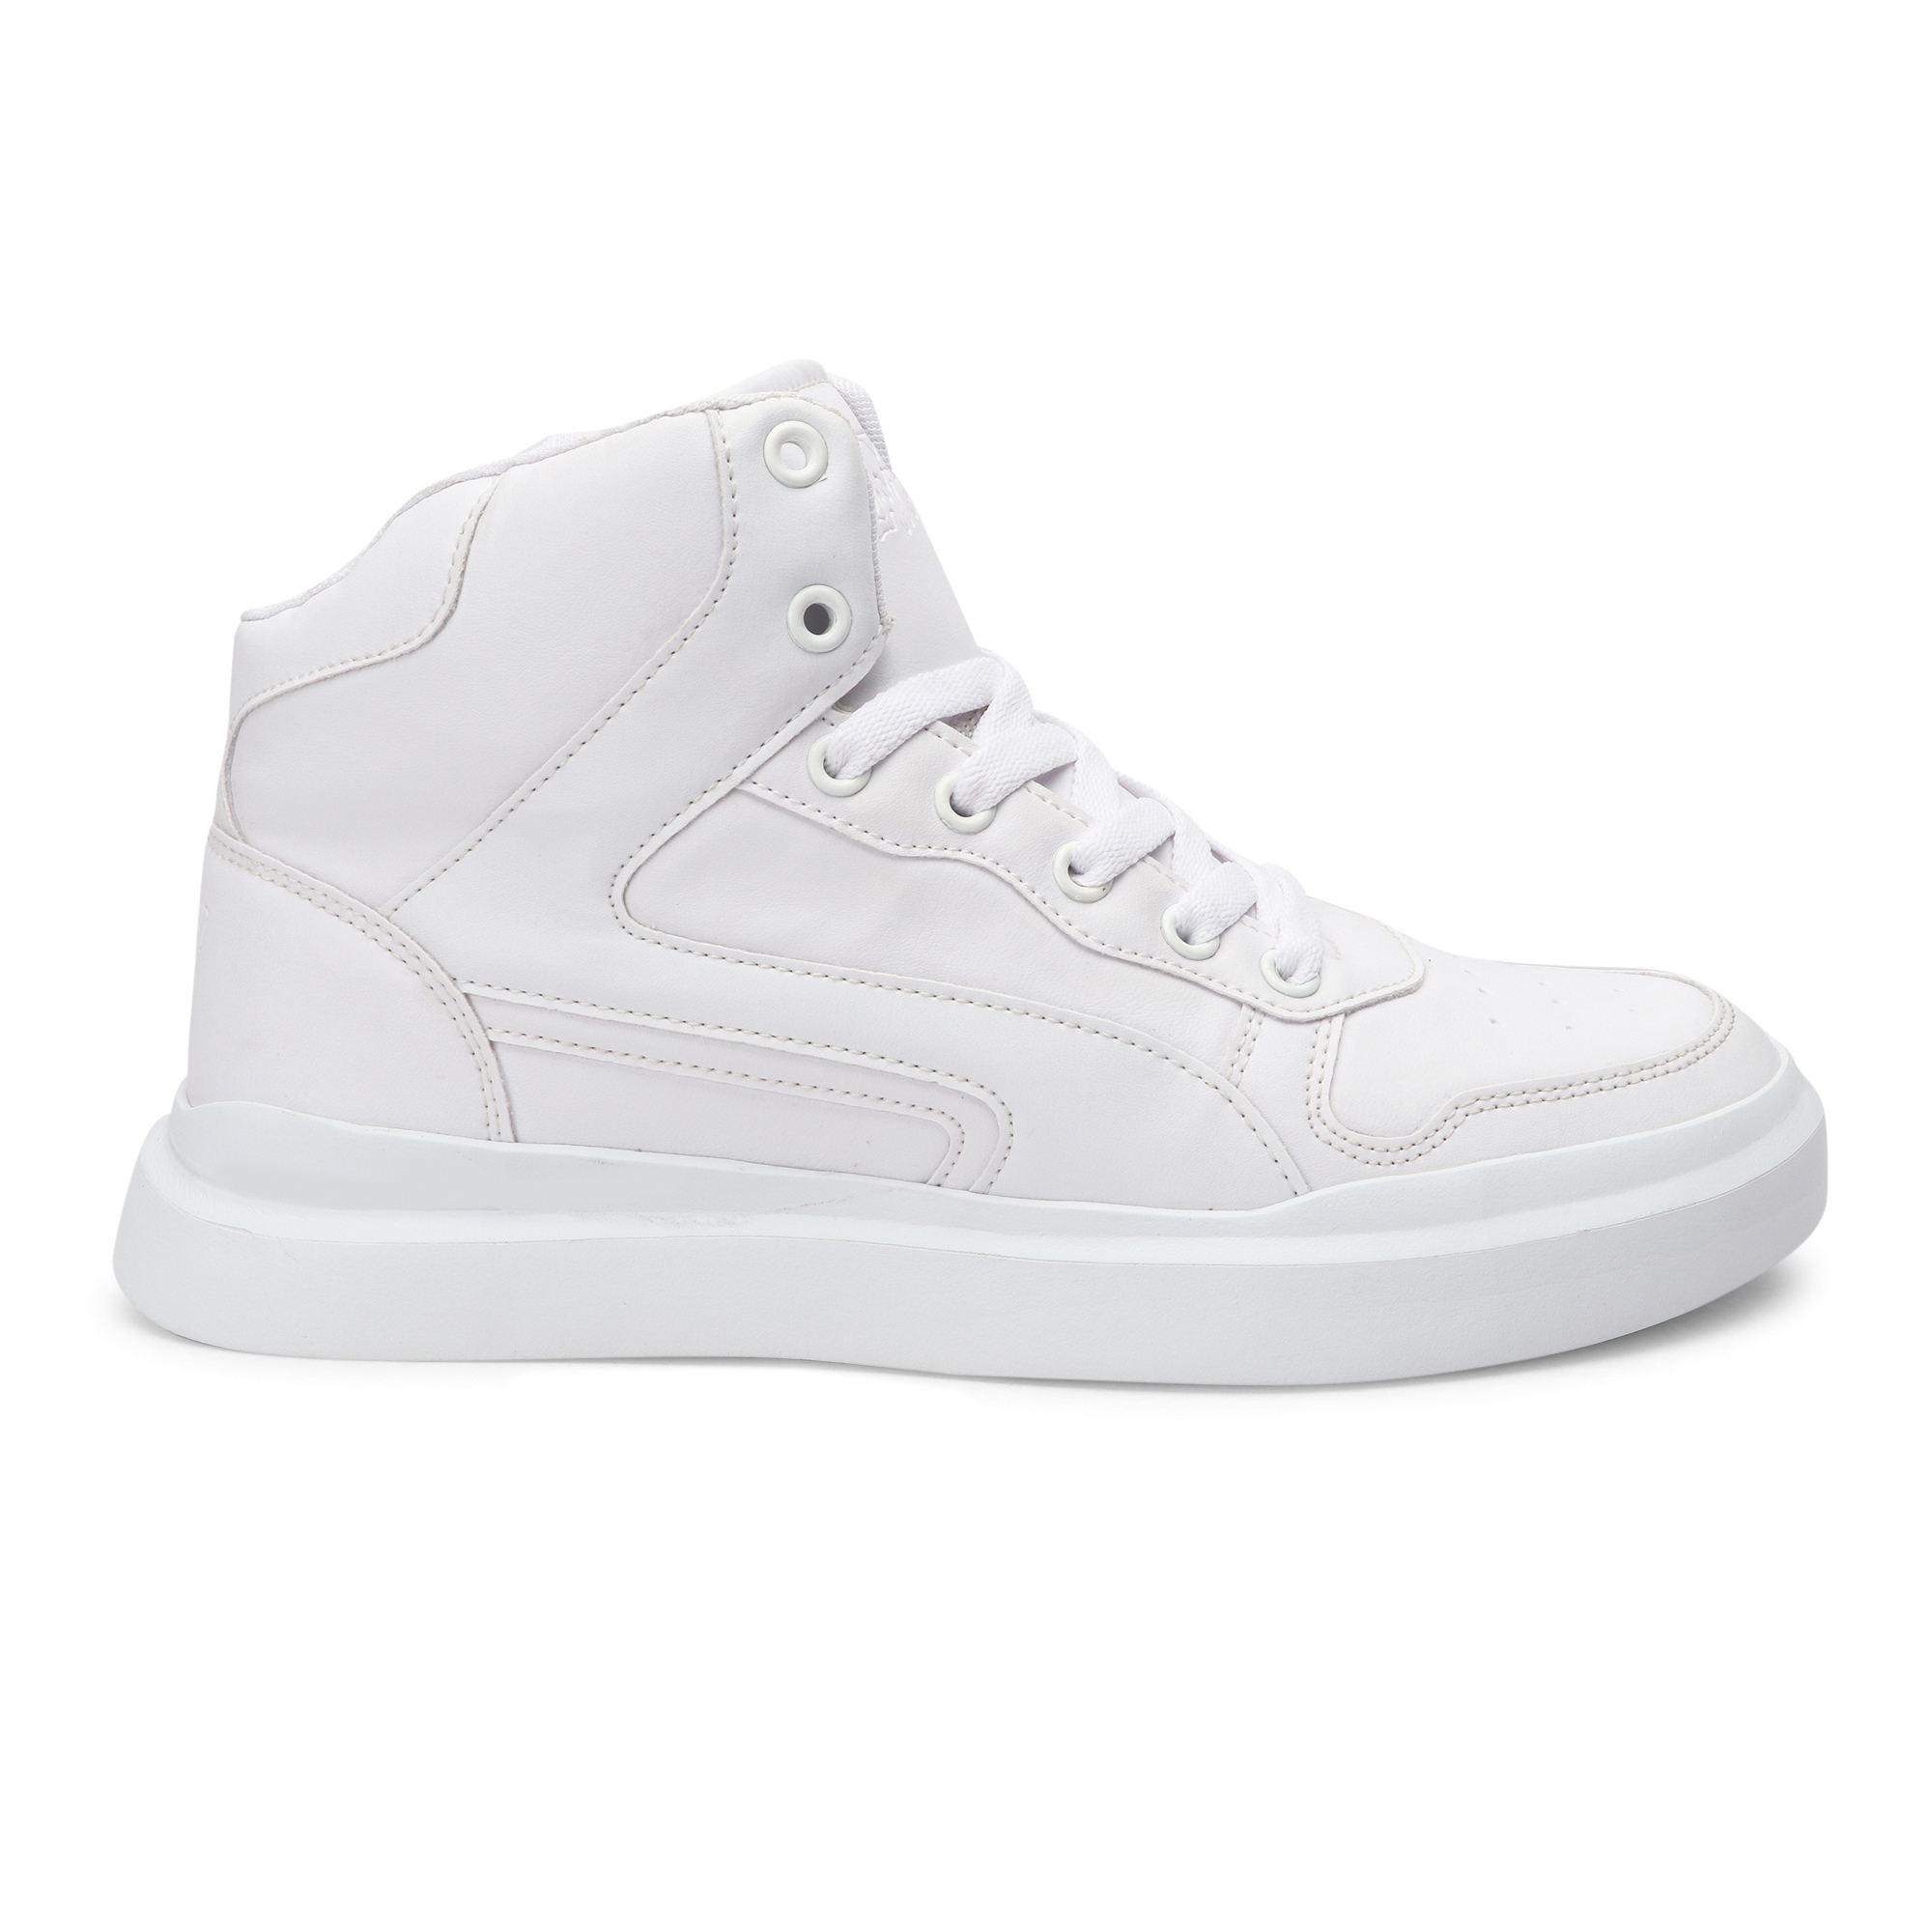 Details 220+ high sole white sneakers super hot